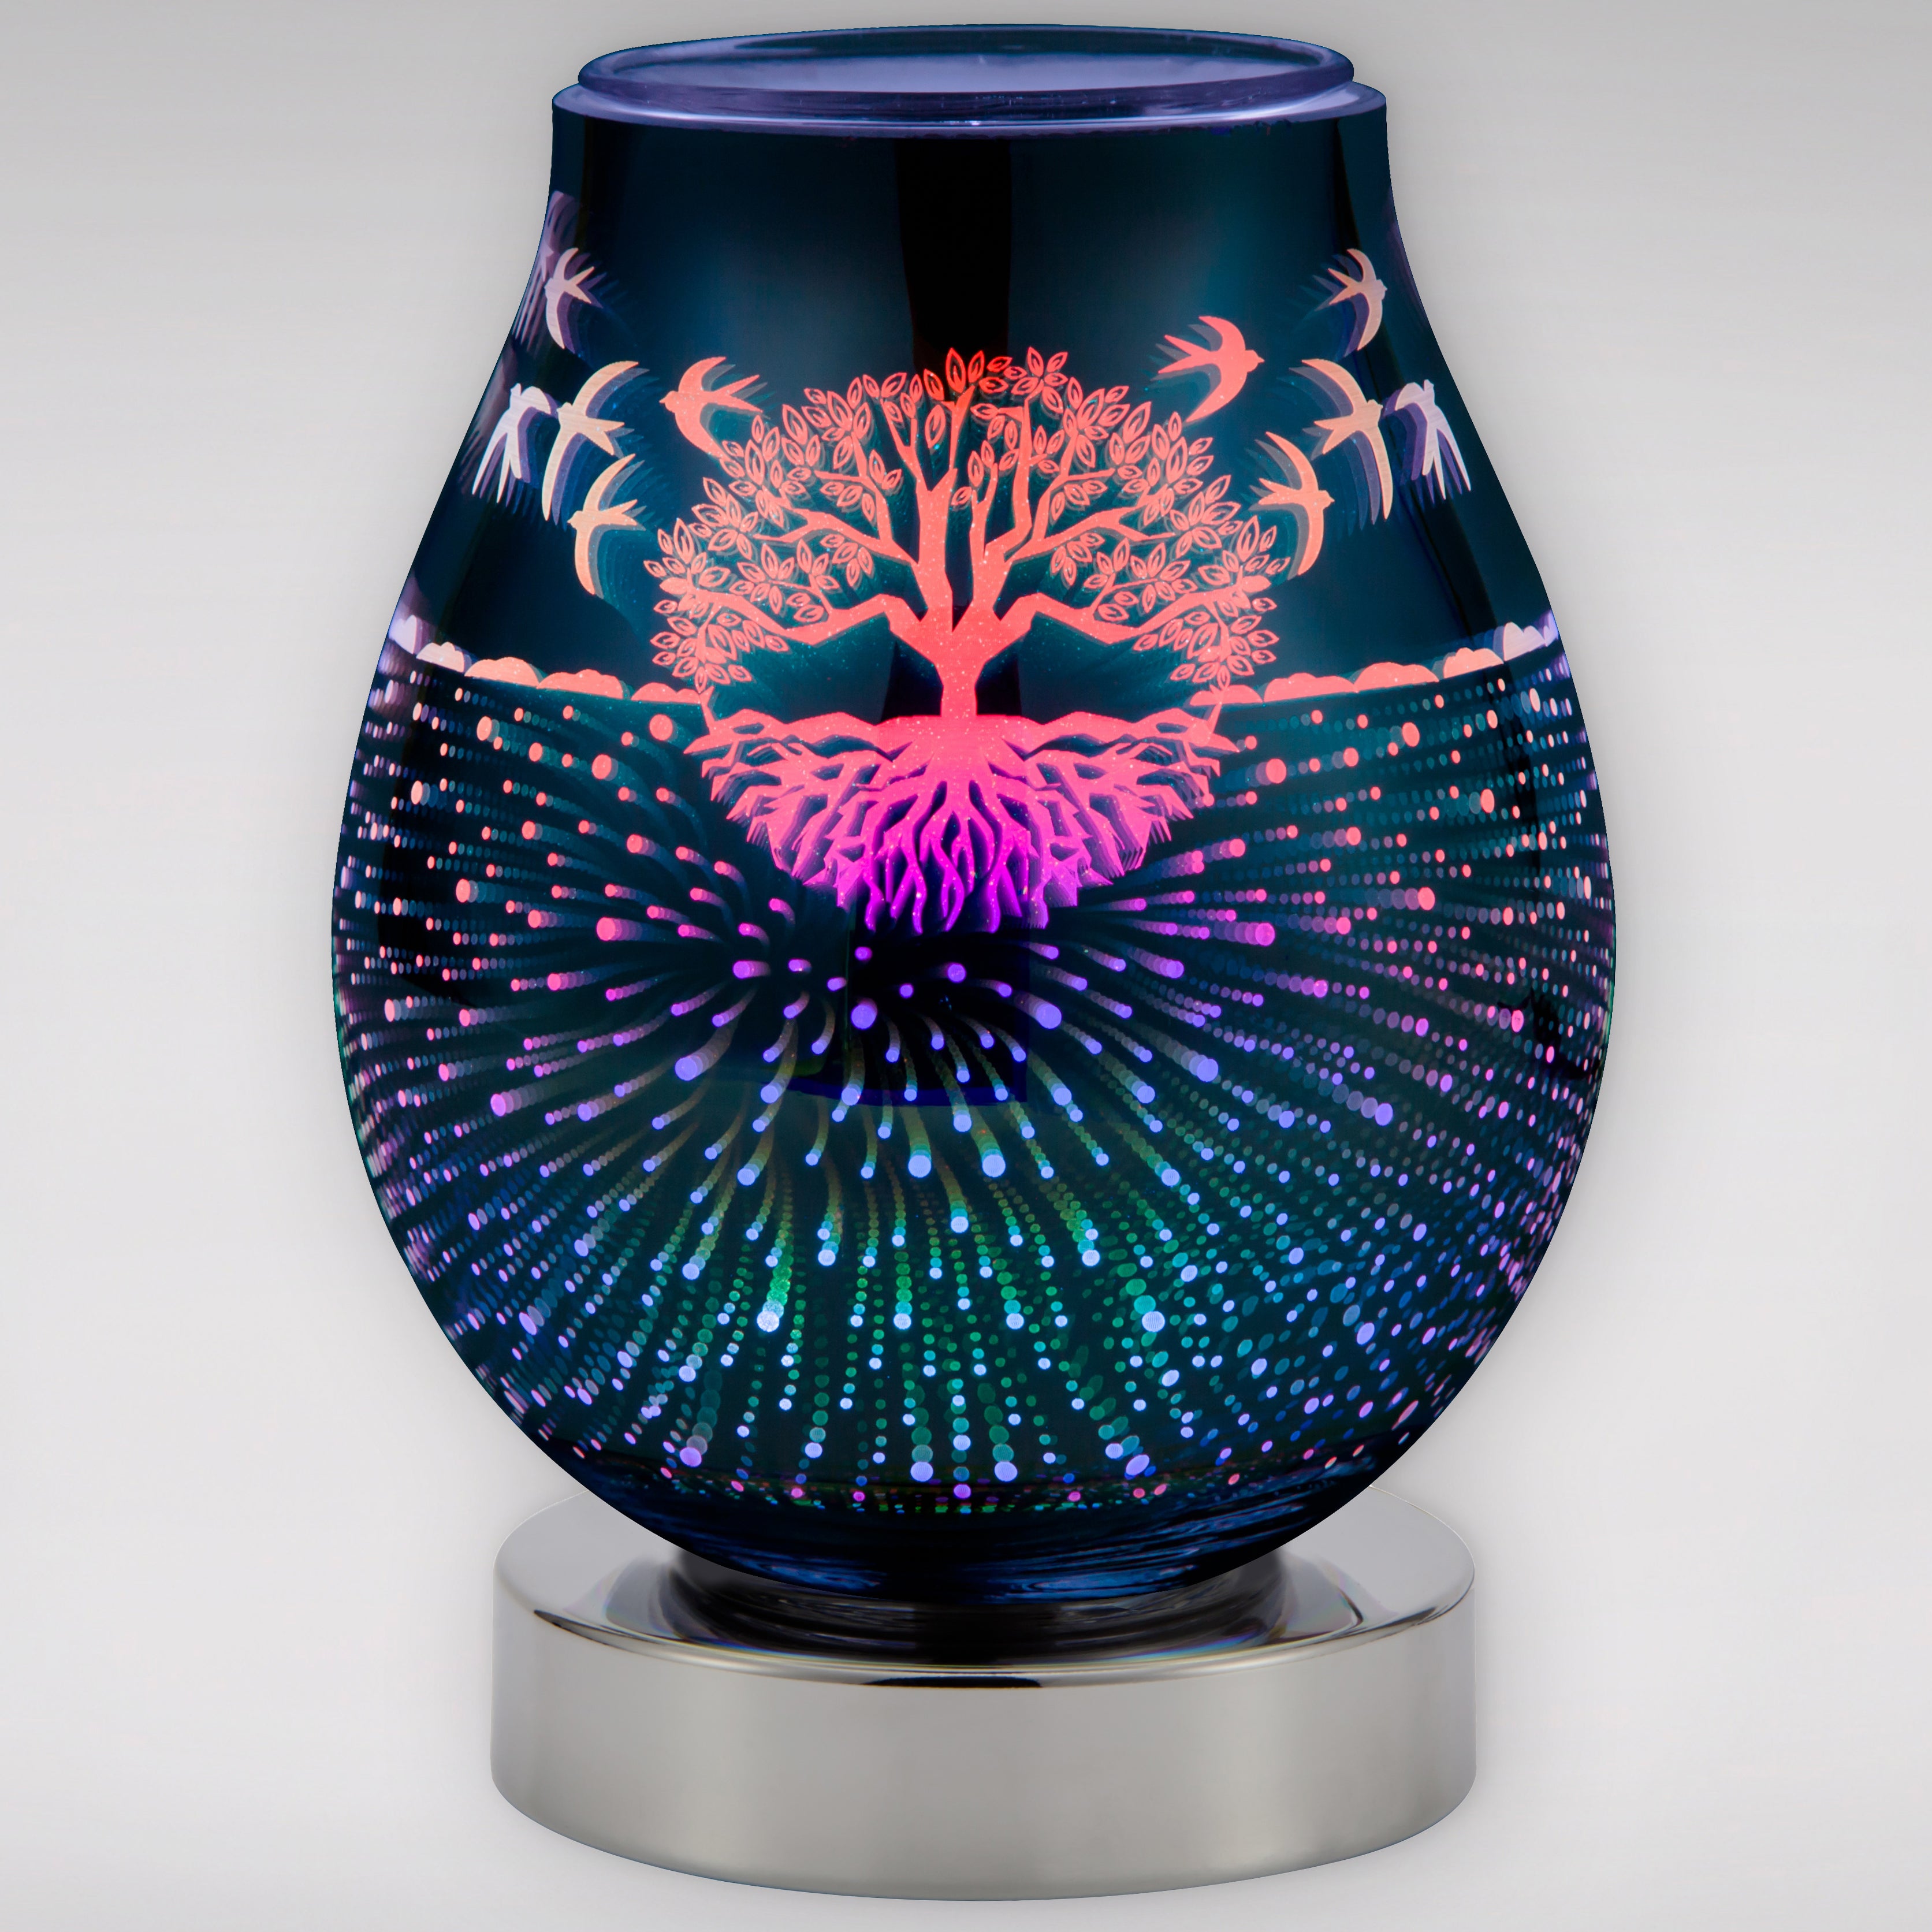 Scentchips Warmer 3D LED 'Tree of Life' Colour Changing Display